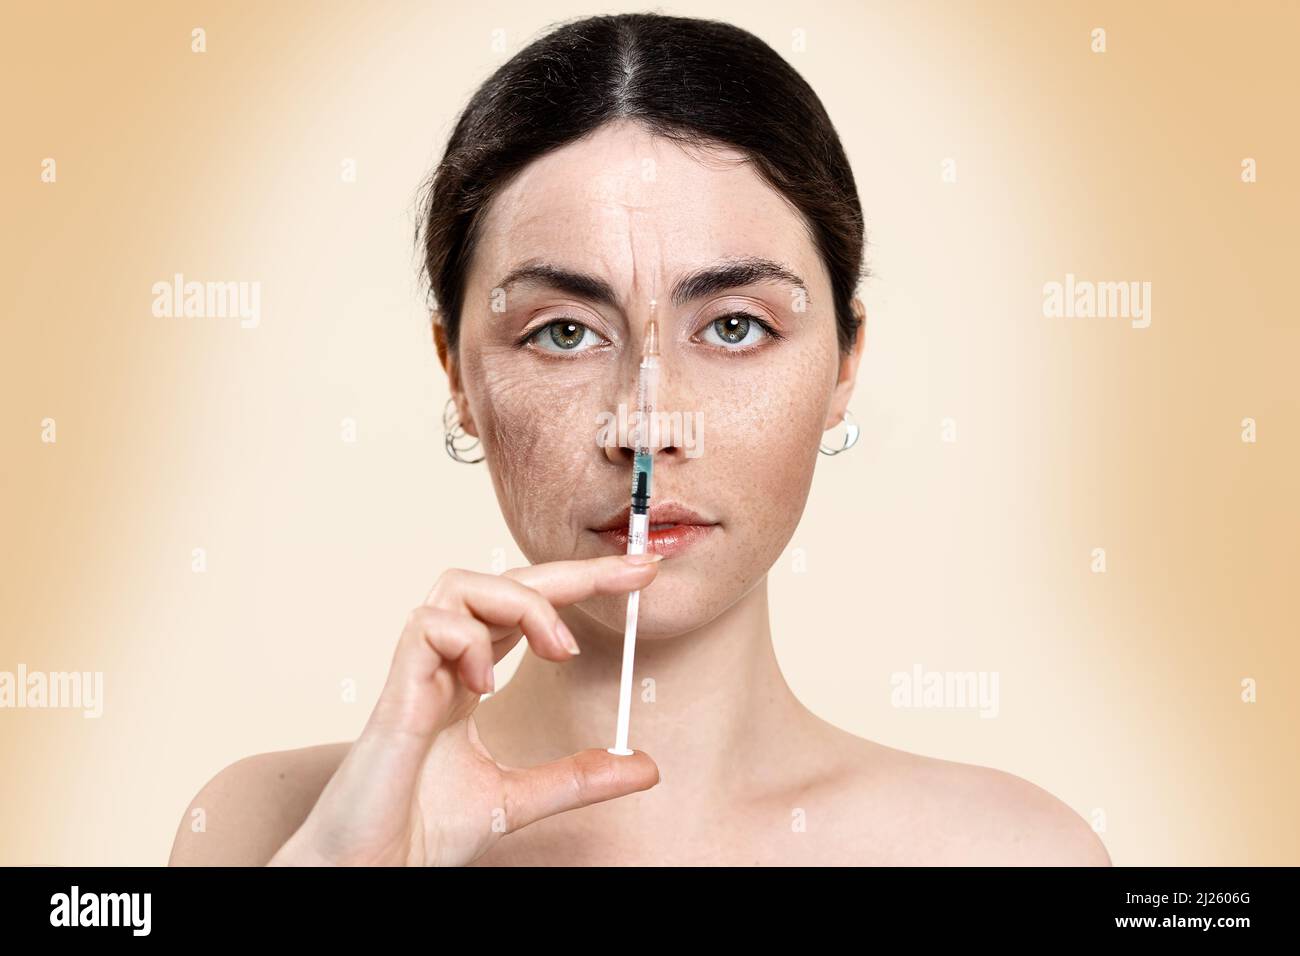 Portrait of a beautiful woman holding a syringe with an injection near the face, divided into two parts-young and old. The result before and after the Stock Photo